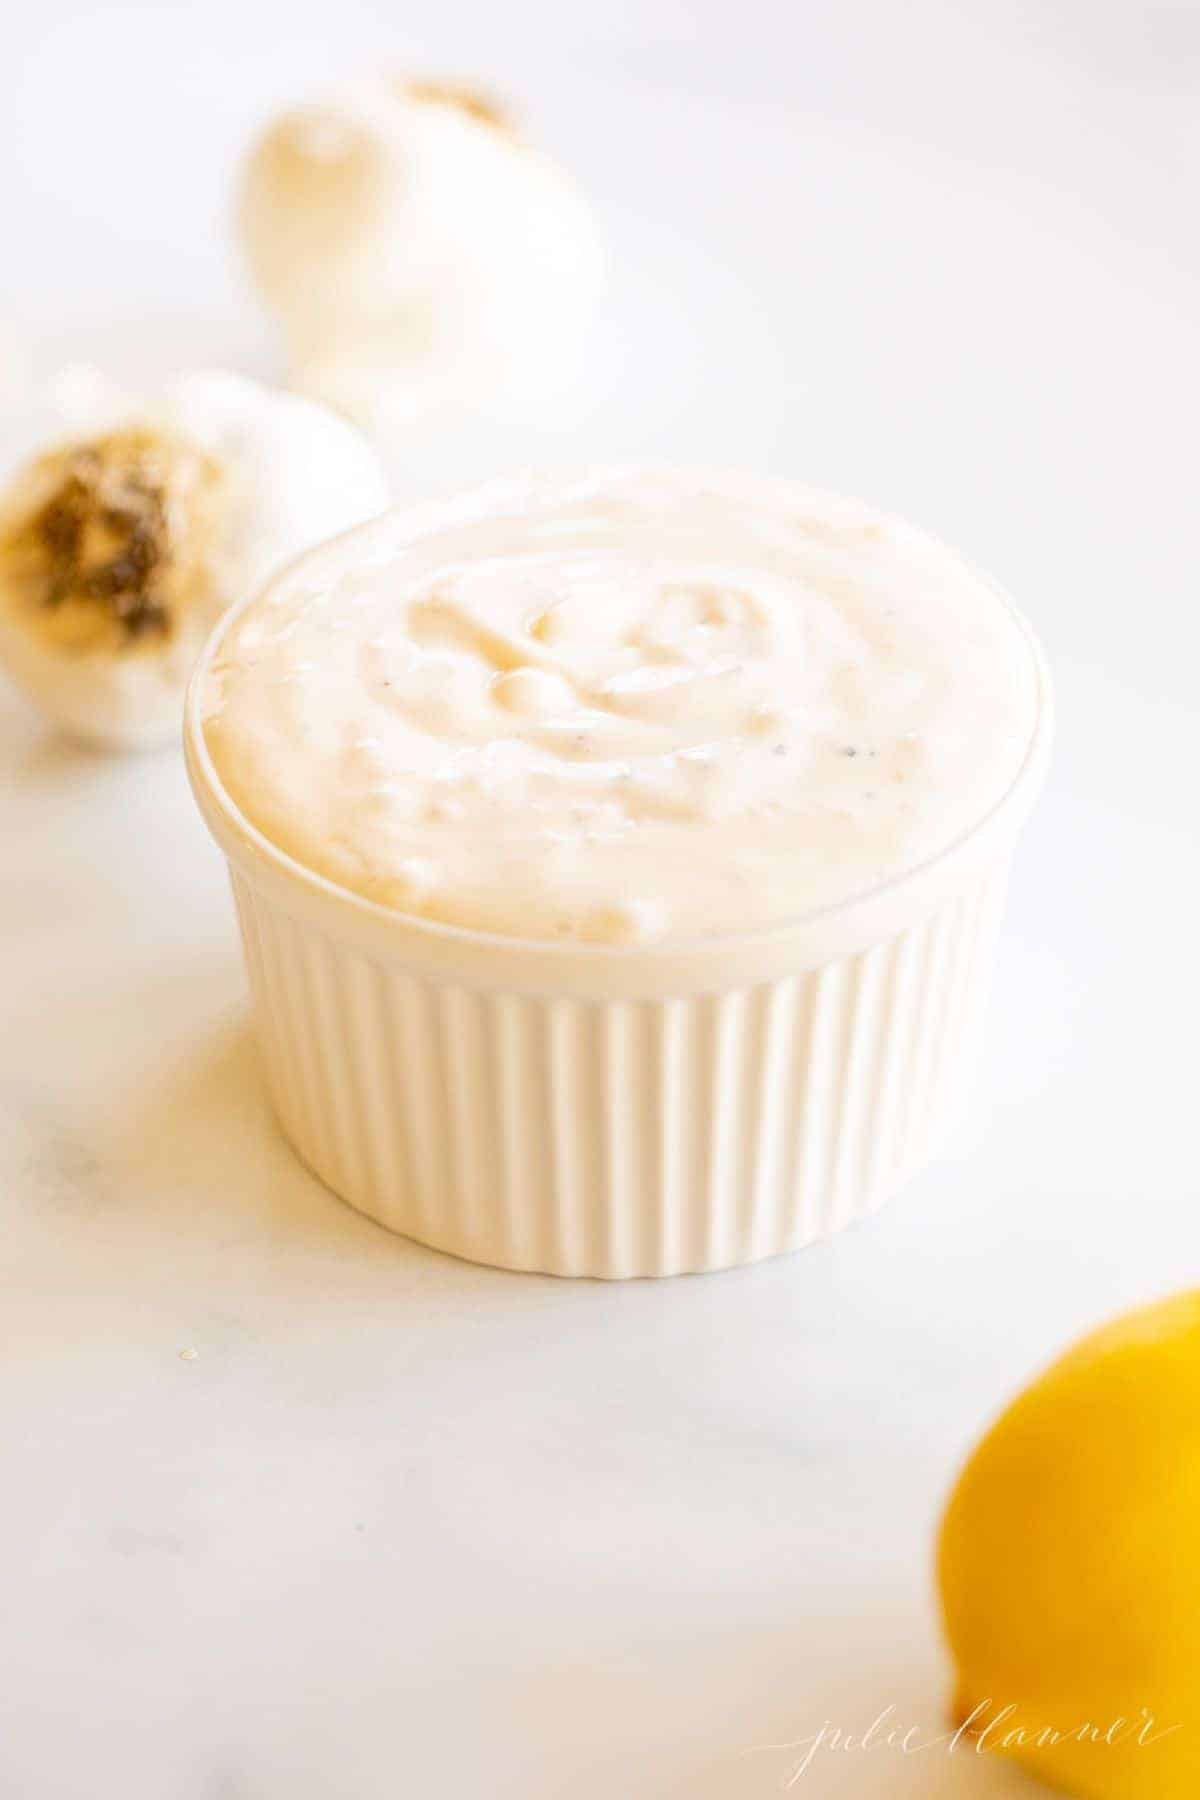 On a marble surface, a white ramekin dish full of fresh garlic aioli, with heads of garlic and a lemon to the side.